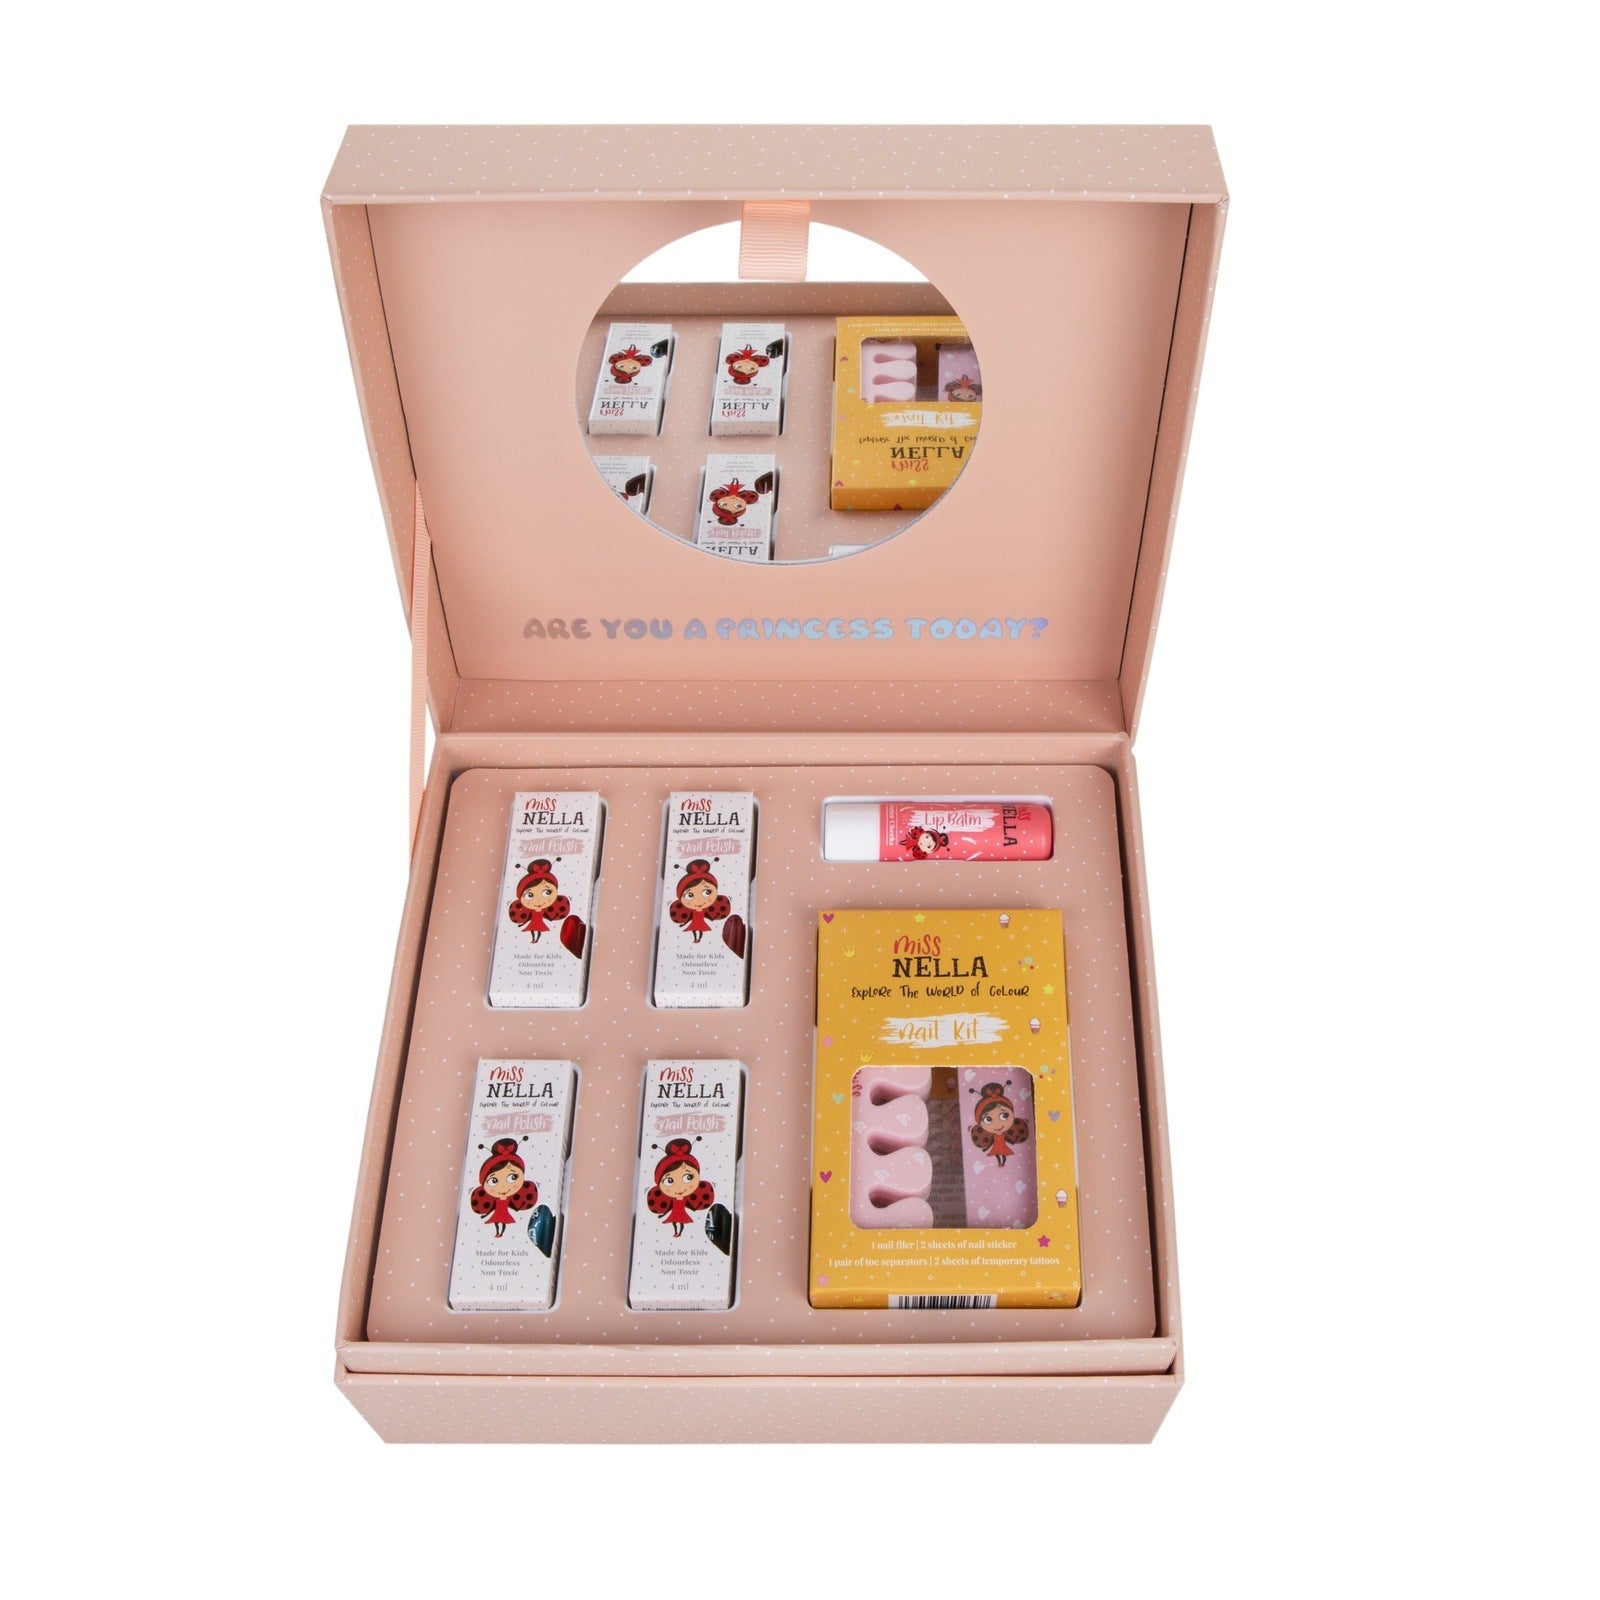 Miss Nella Limited Edition Beauty Case - Dress-Up & Play